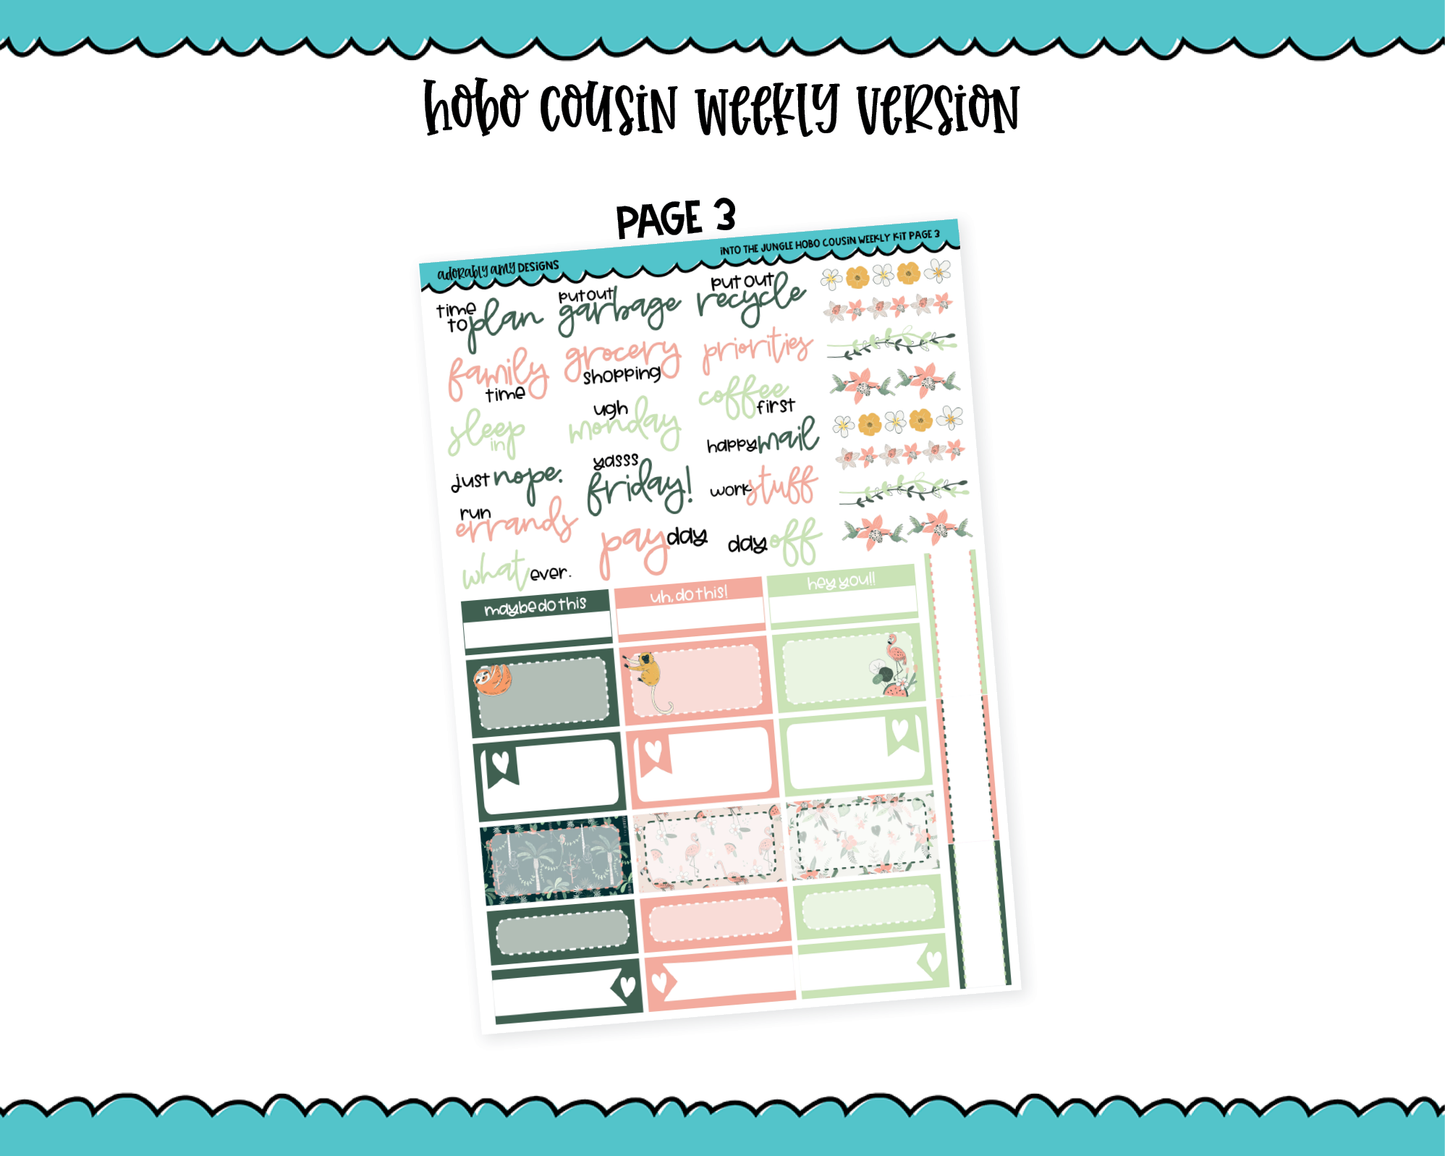 Hobonichi Cousin Weekly Into the Jungle Planner Sticker Kit for Hobo Cousin or Similar Planners